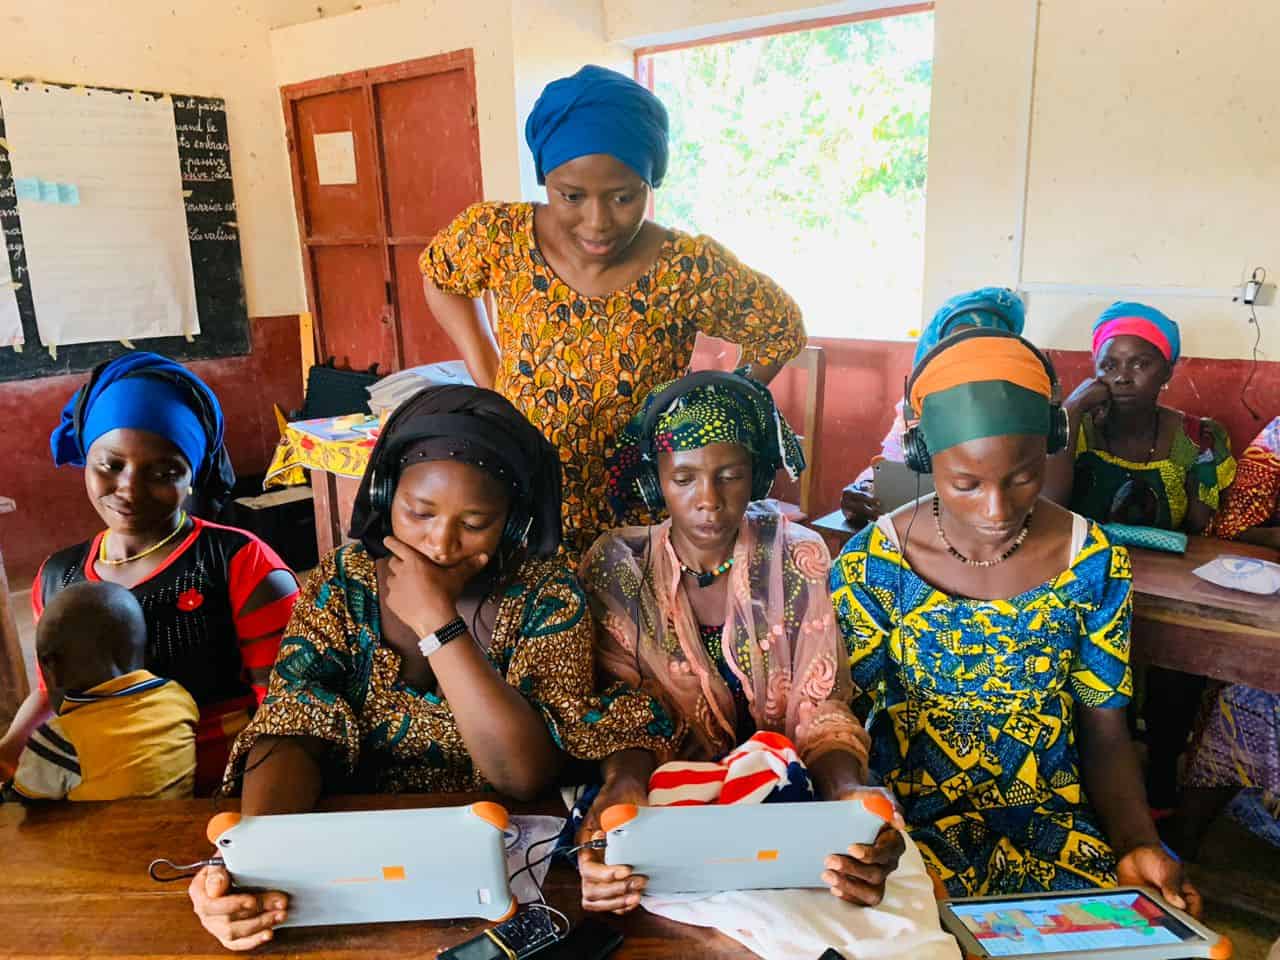 Women taking a mother tongue course on Action Education tablets